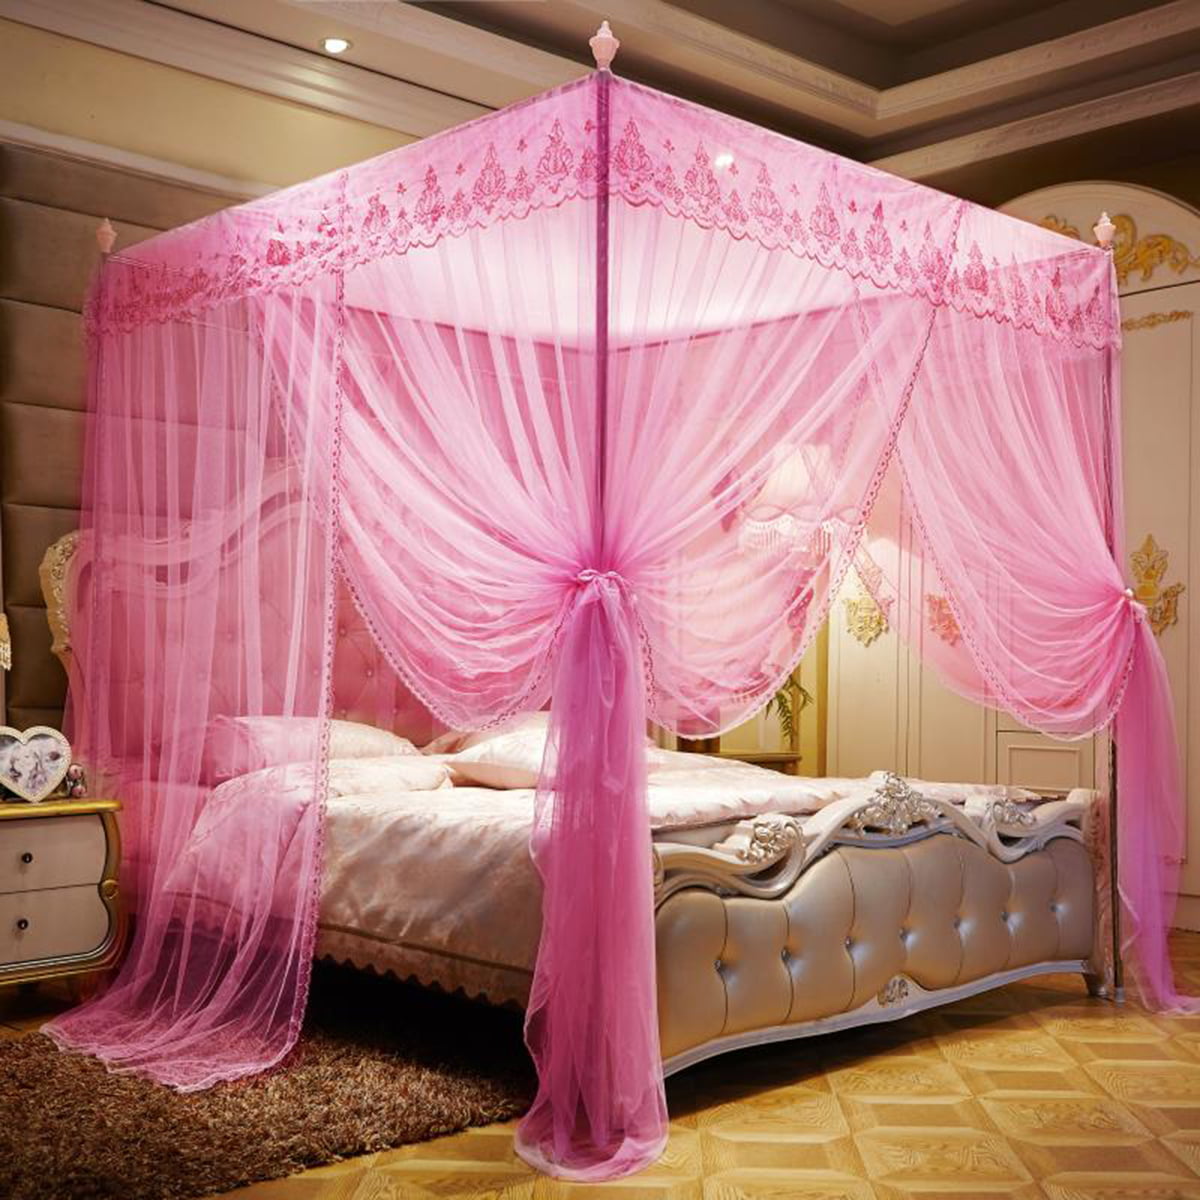 Canopy Bed Curtains Near Me 25 Canopy Bed Ideas Modern Canopy Beds